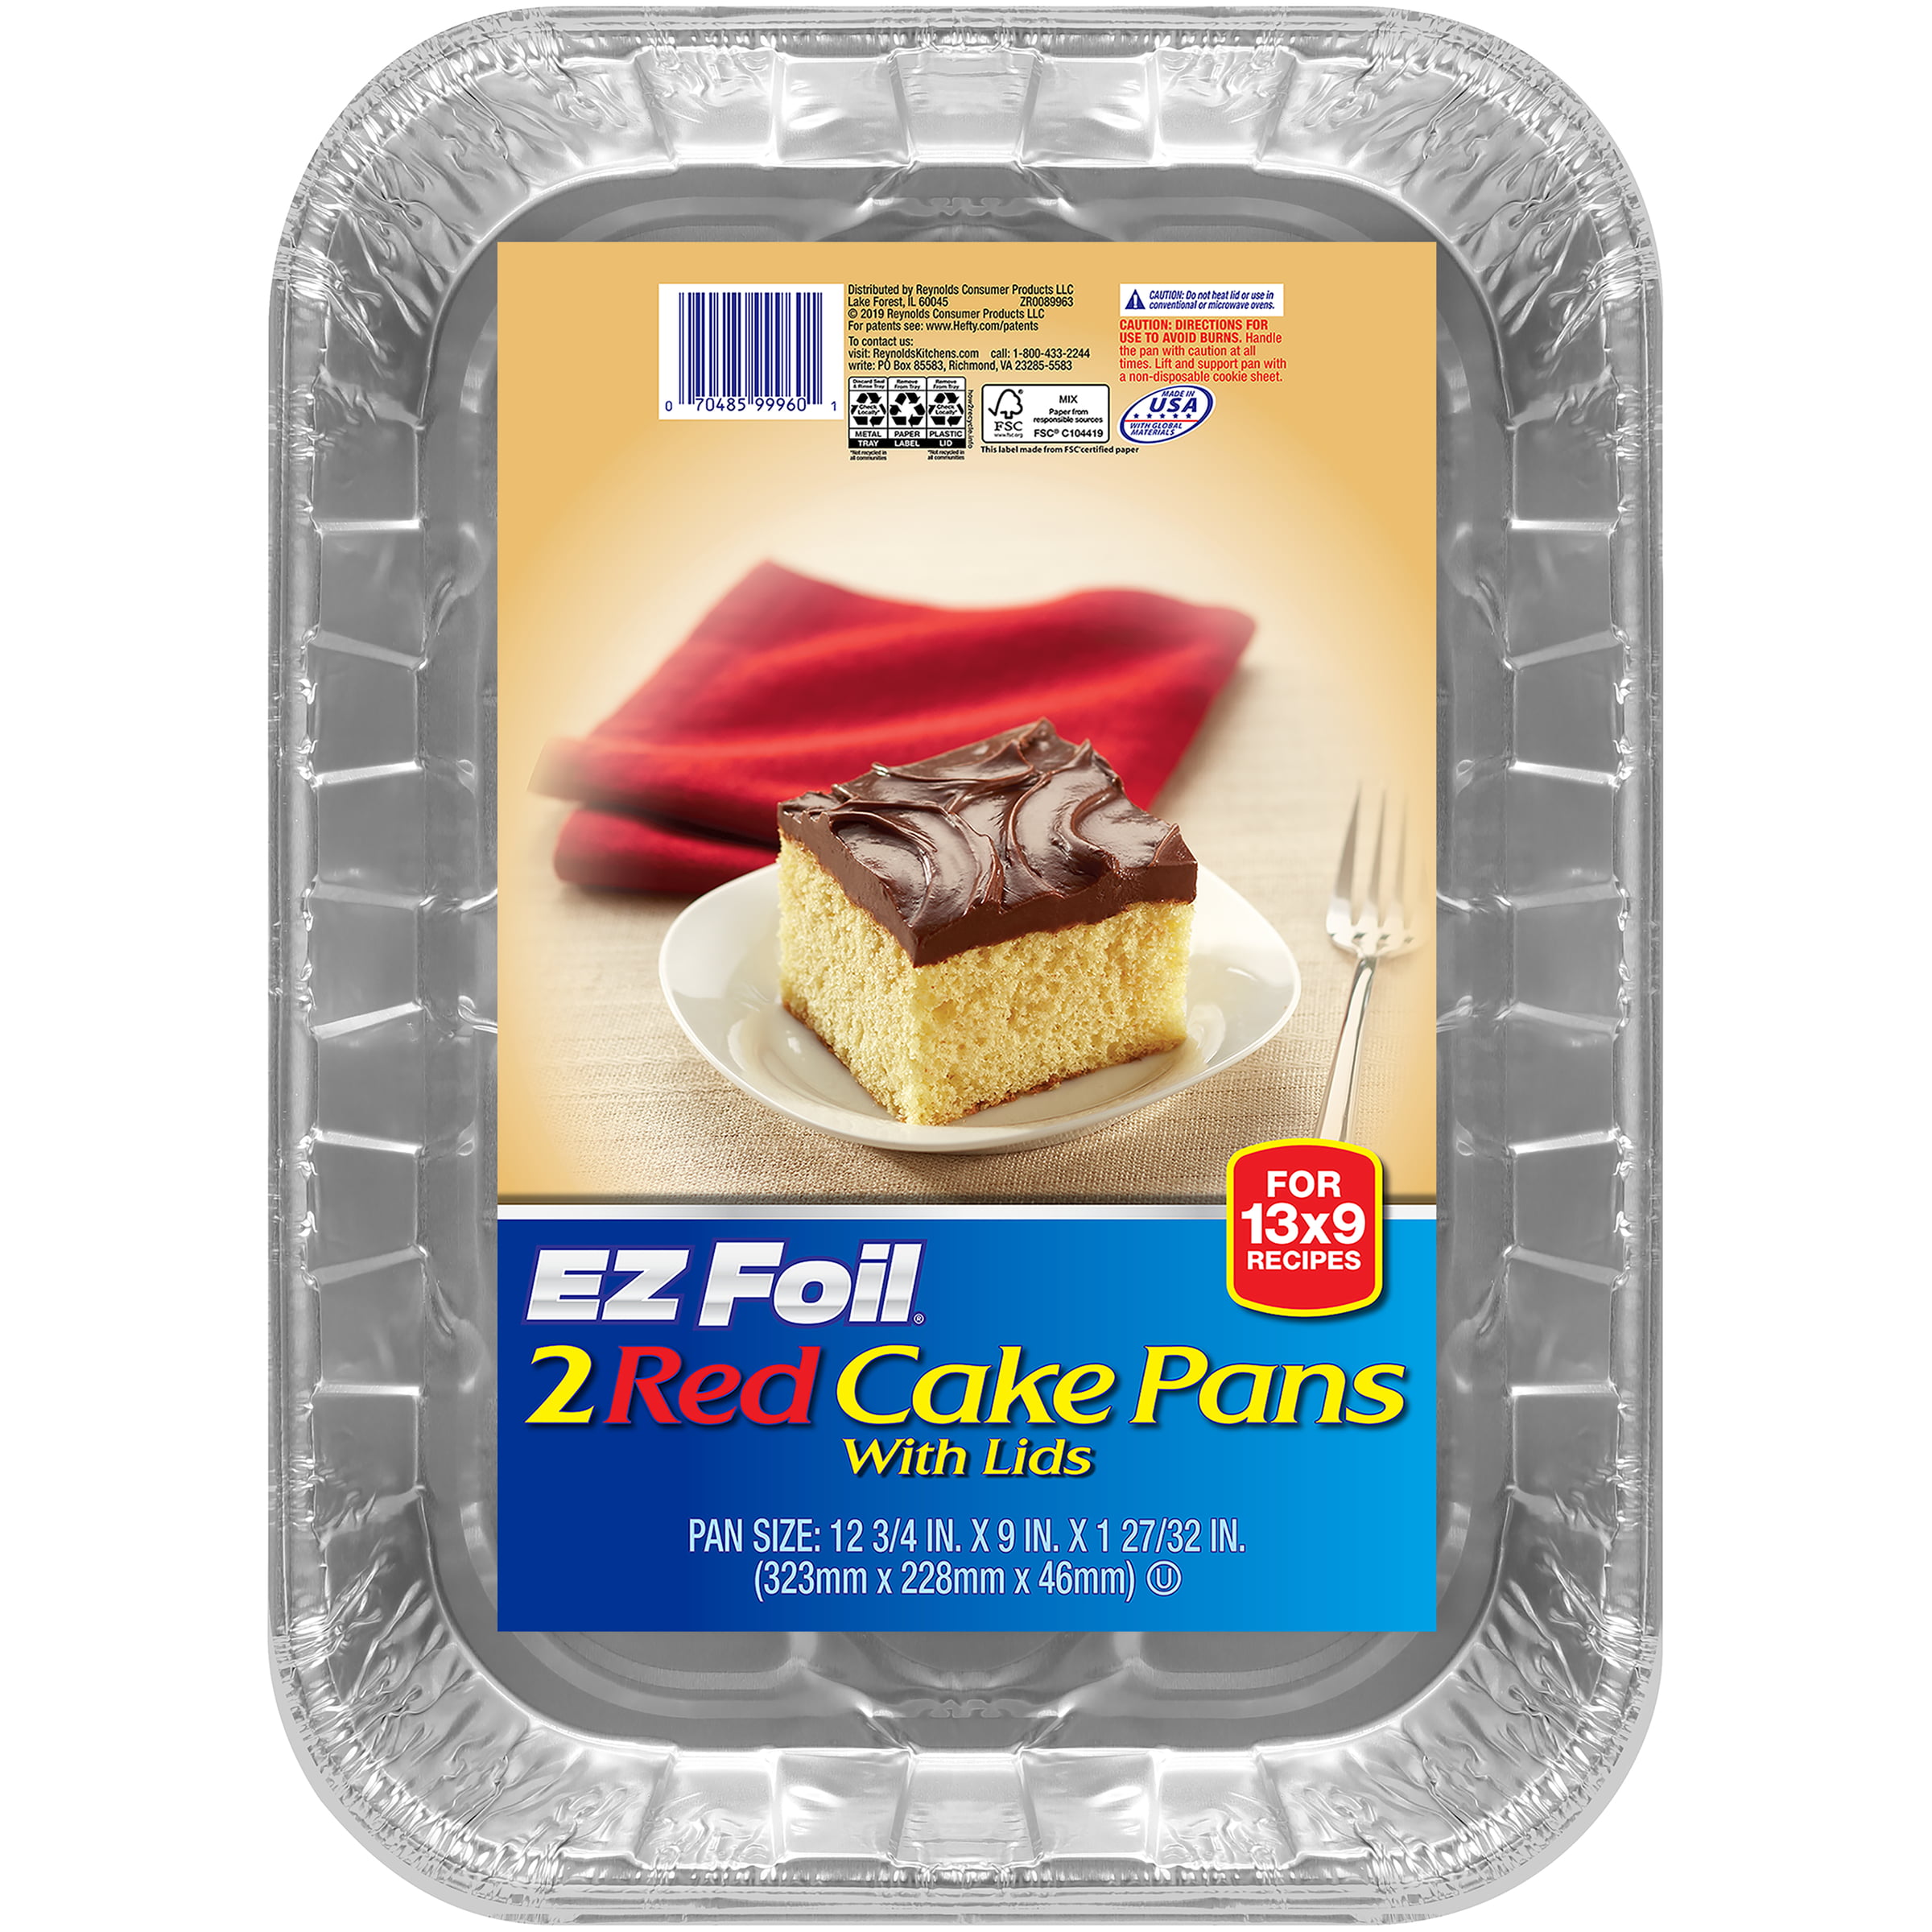 Hefty EZ Foil Red Cake Pans with Lids, 2 Count